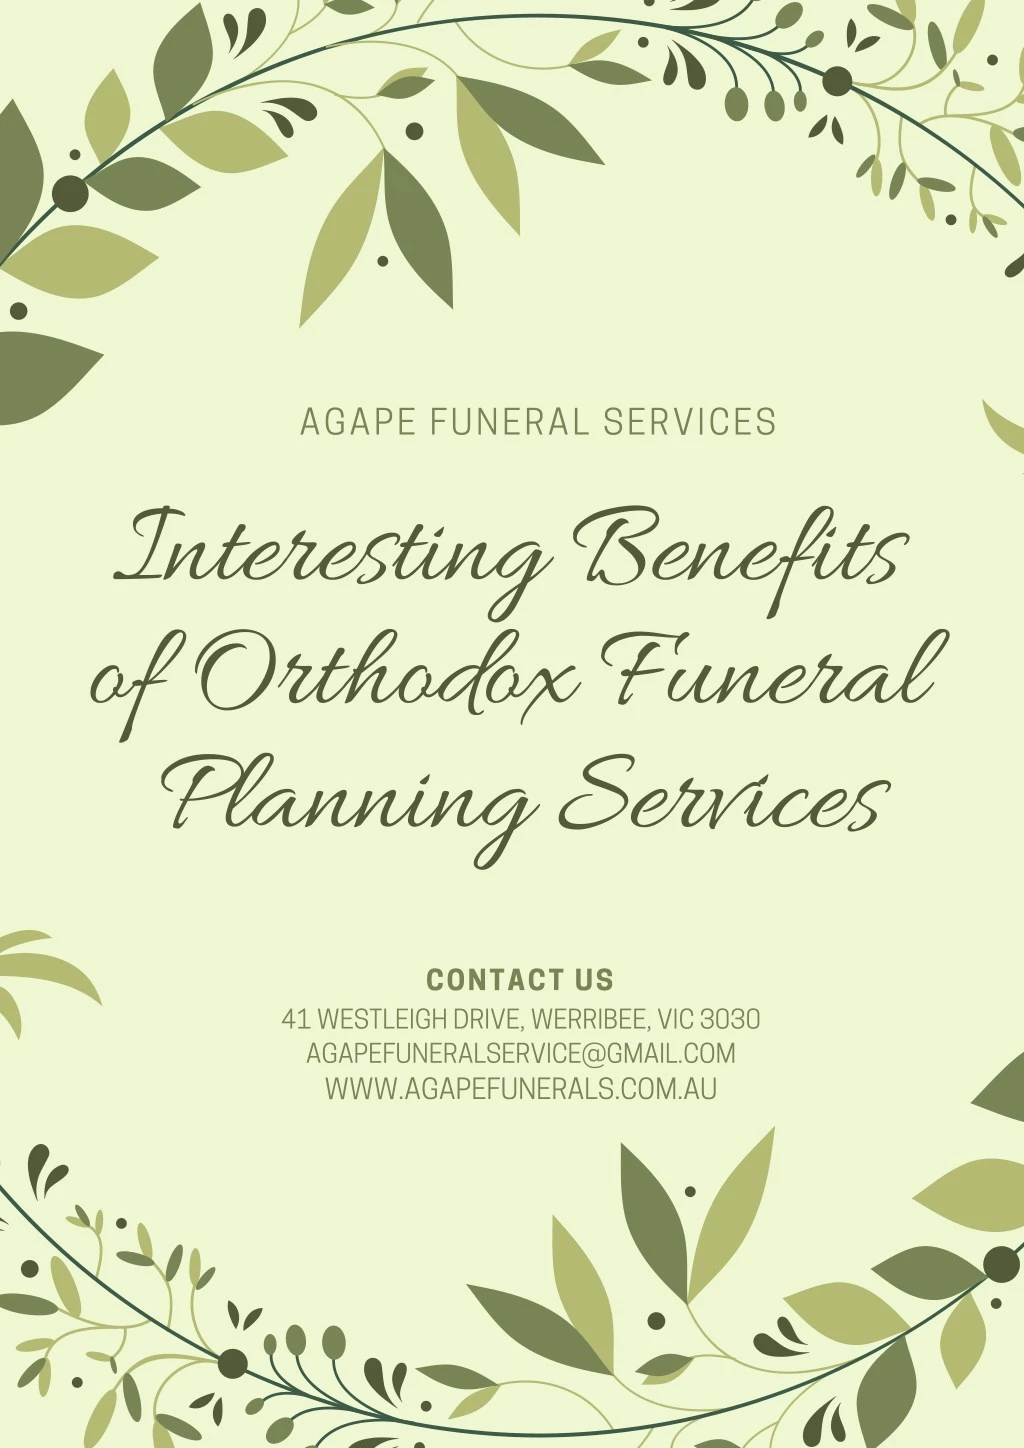 agape funeral services